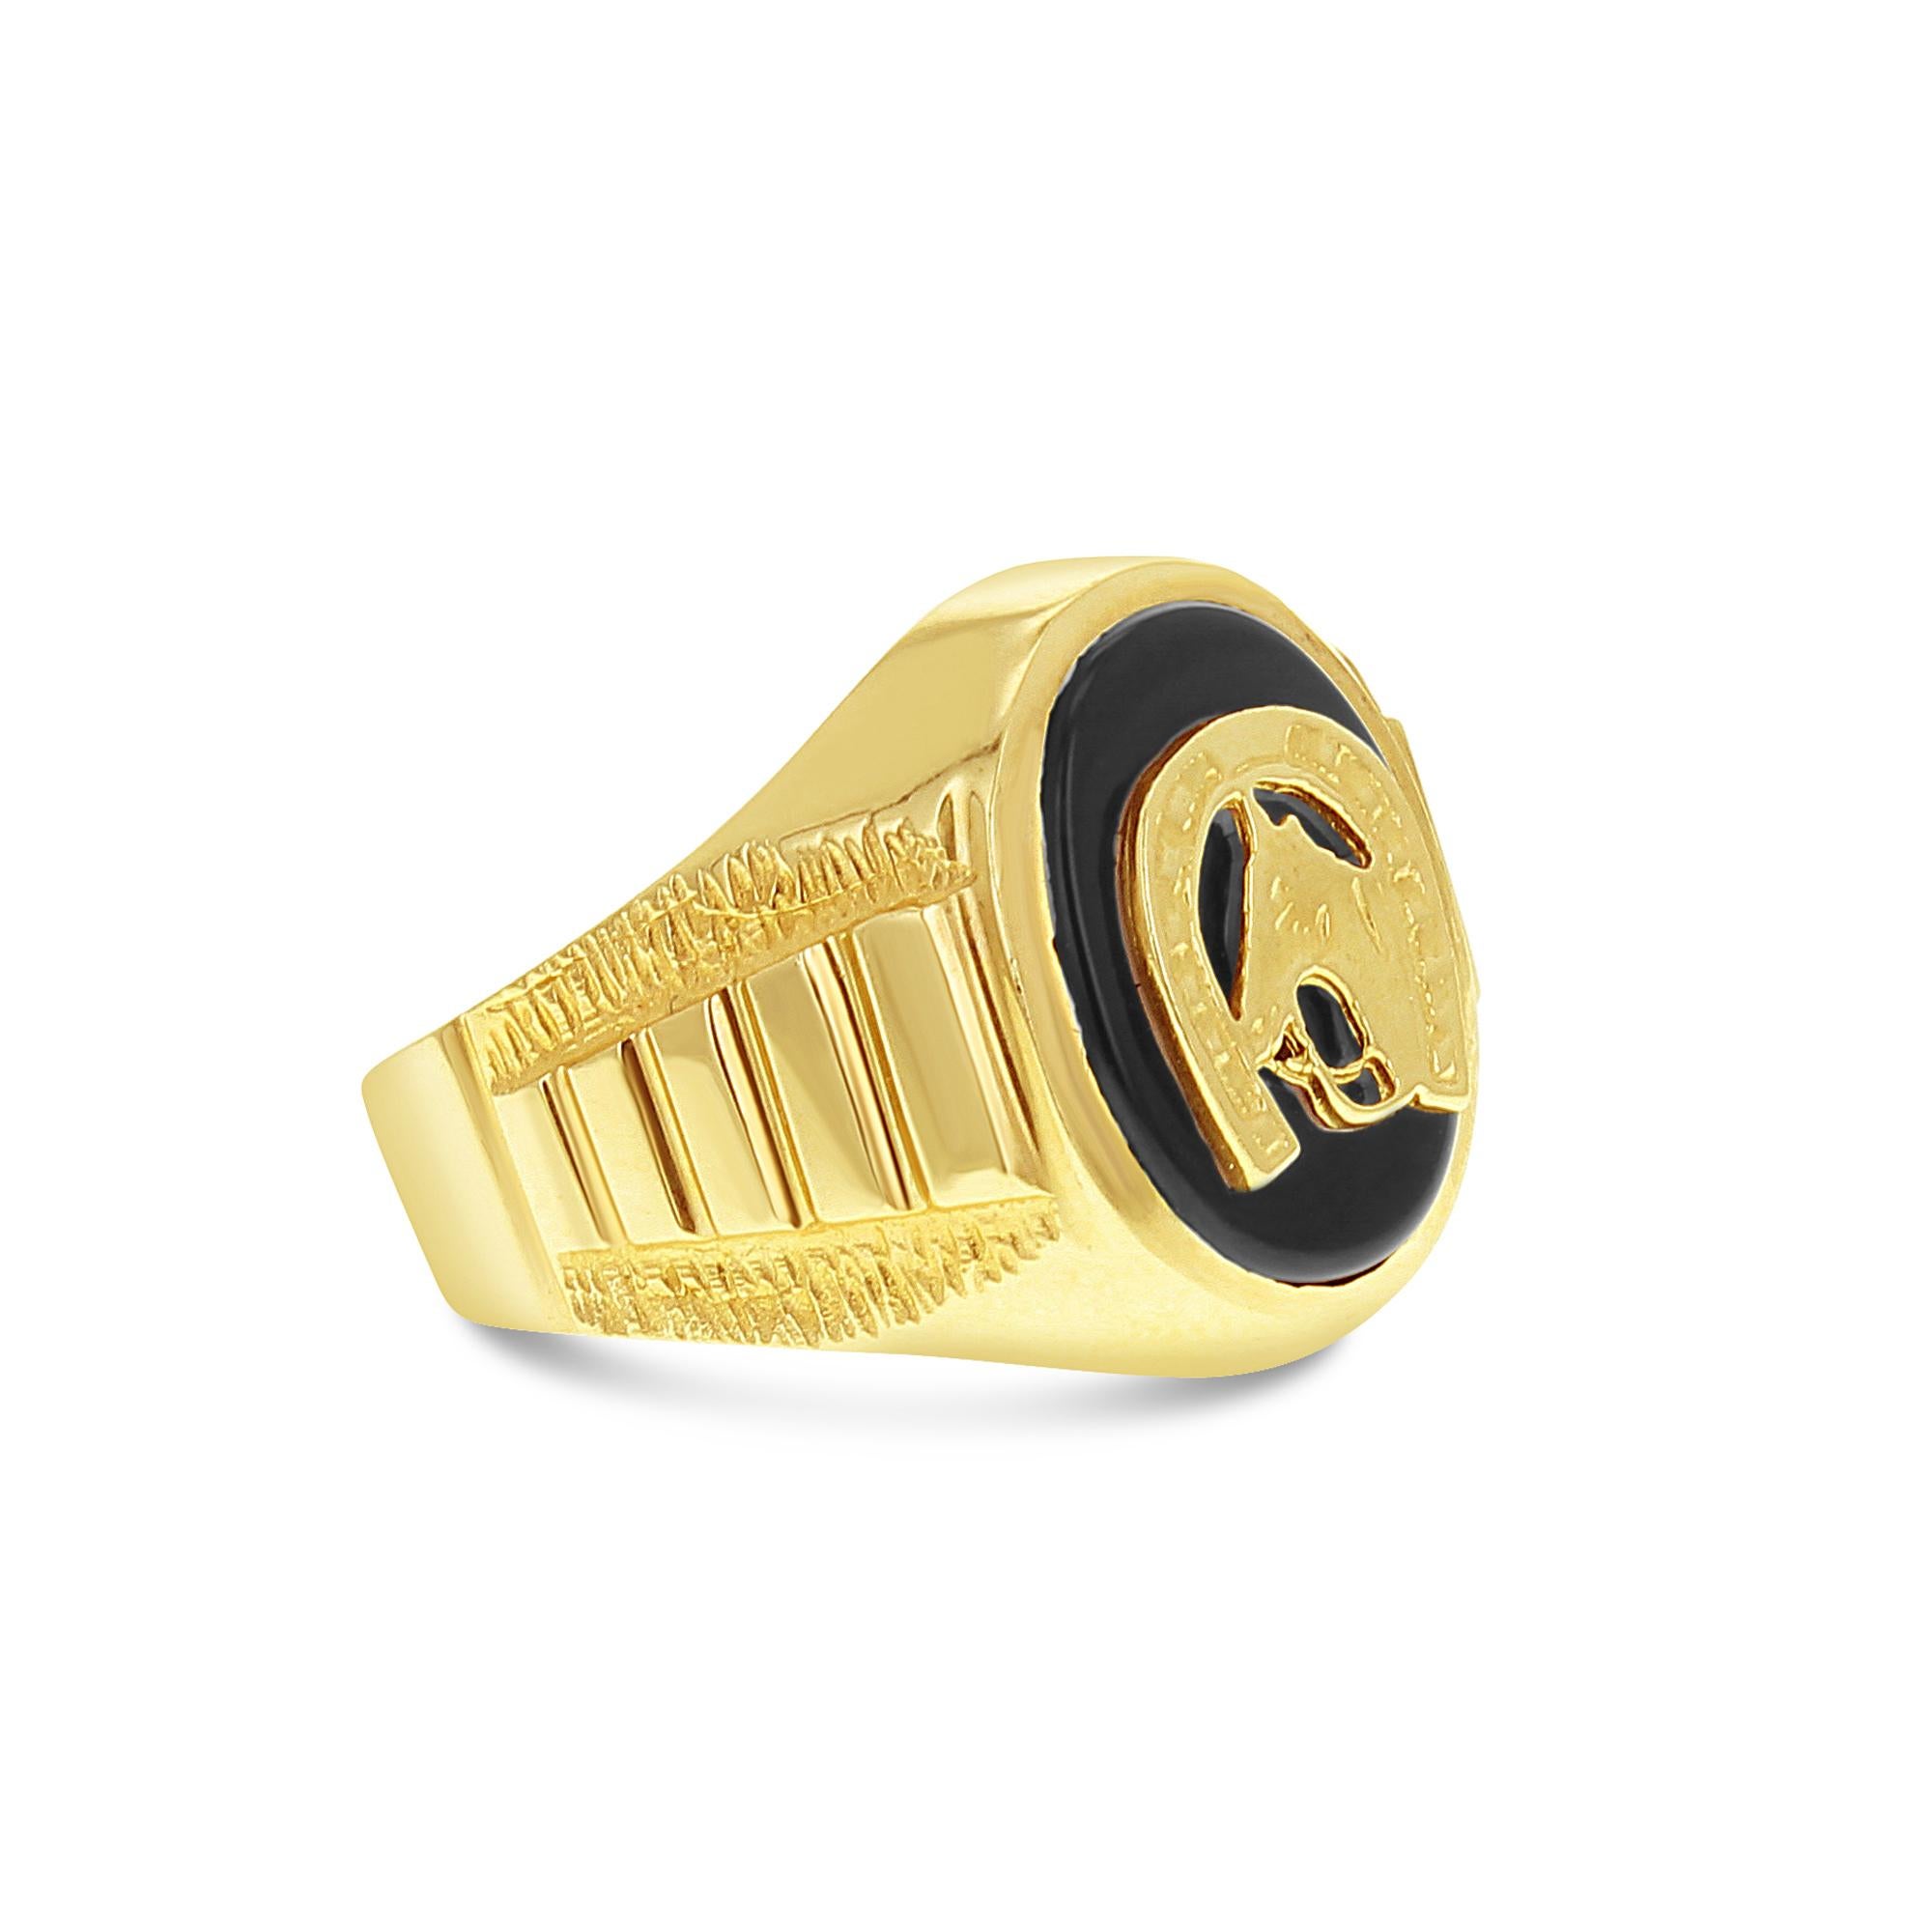 ♥ Product Summary ♥

Stone: Onyx 
Band Material: 14k Yellow Gold (stamped) 
Weight: 9 grams 
Dimensions: 19mm 